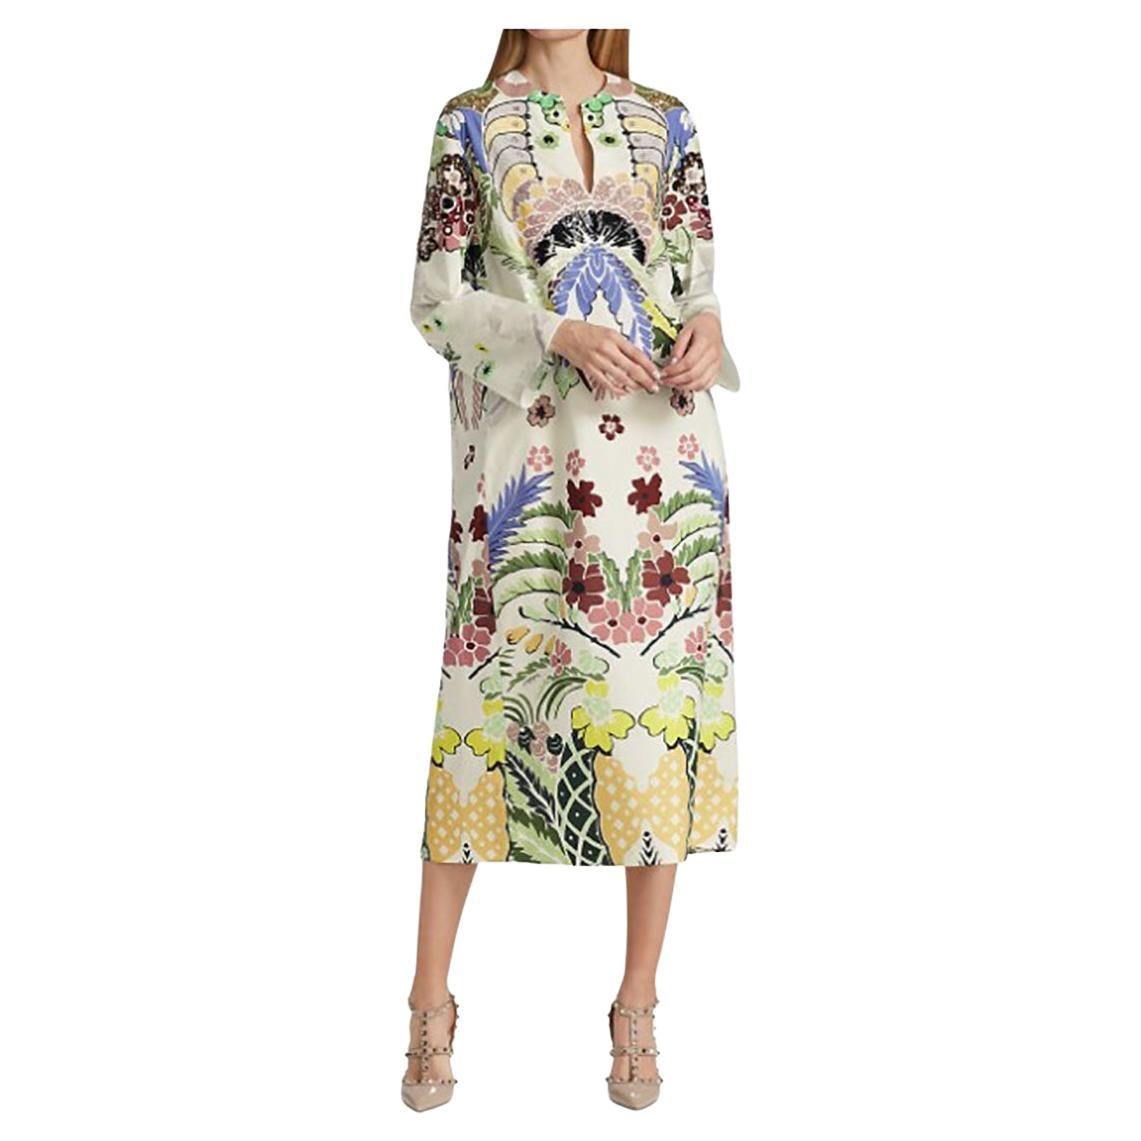 VALENTINO FLORAL-EMBROIDERED COTTON TUNIC DRESS Sz IT 42 - US 6